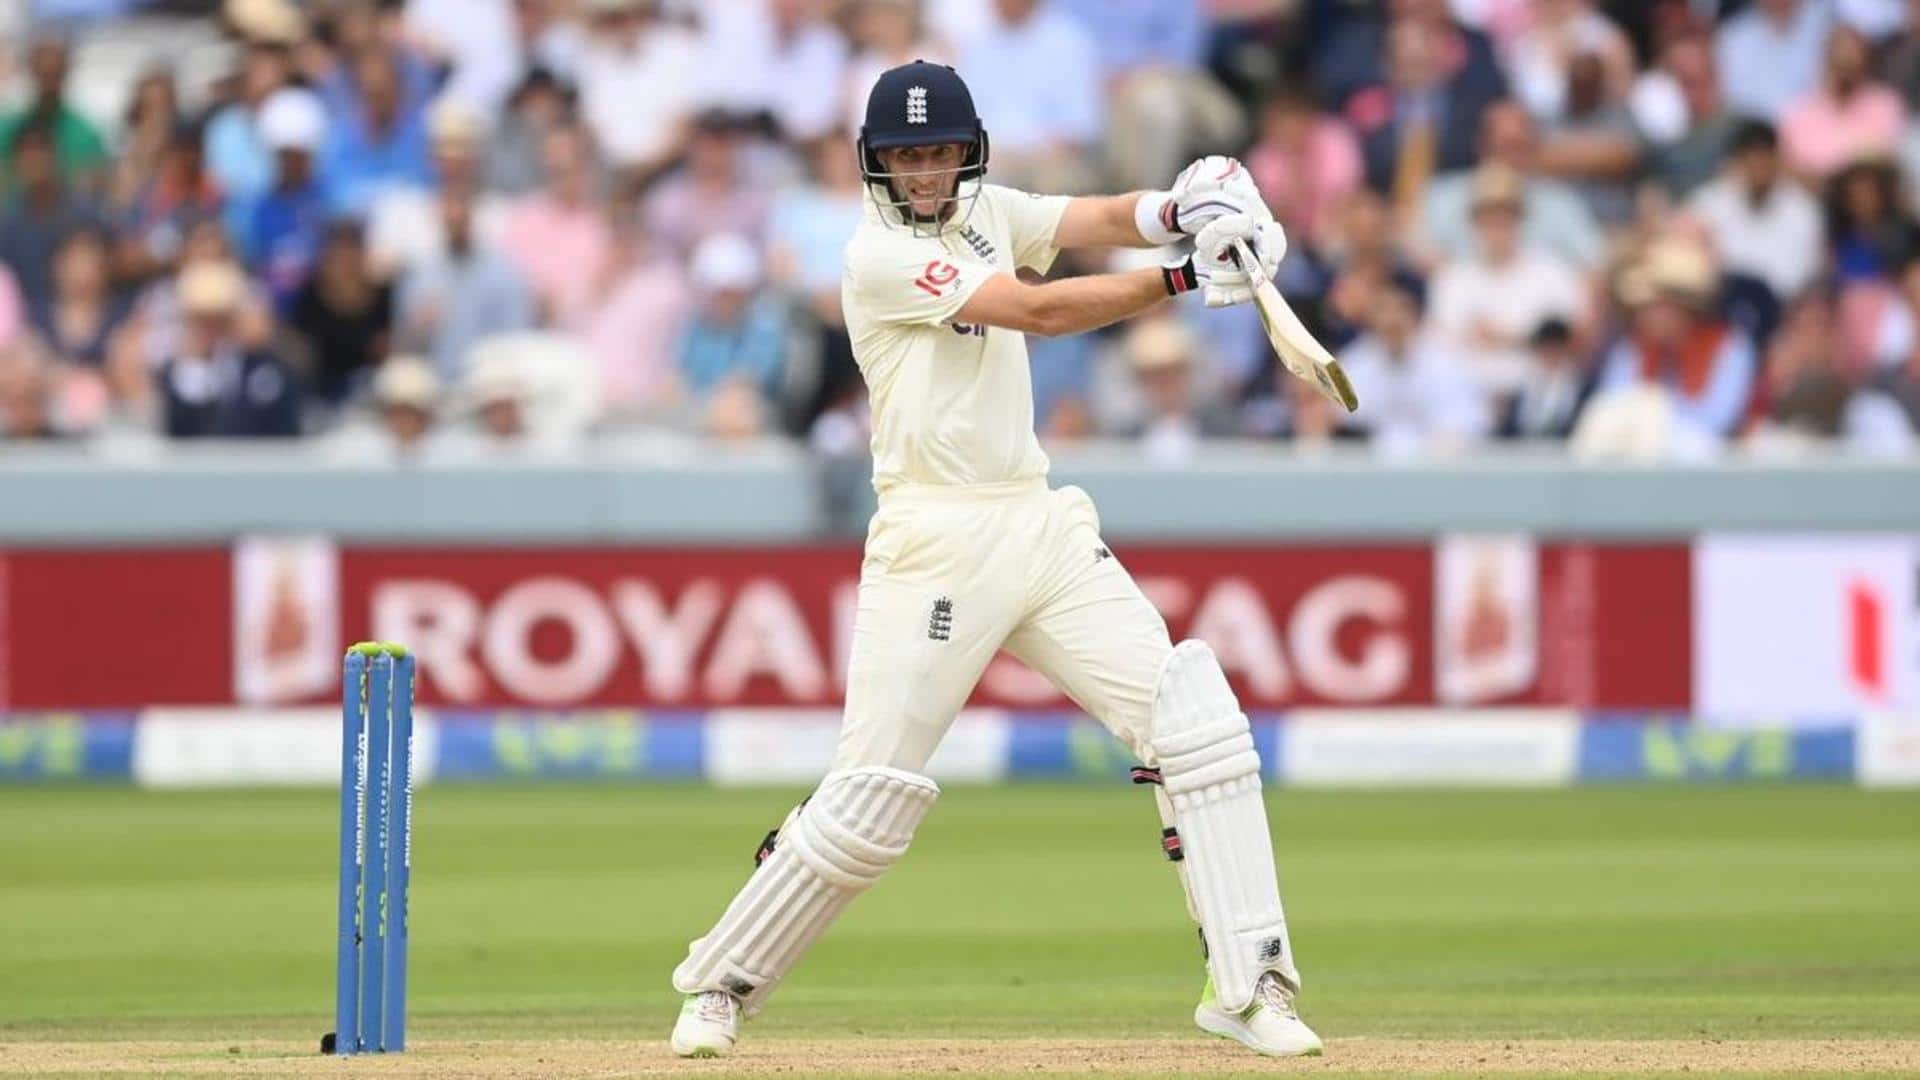 Ashes 2023, Joe Root averages 60.76 in Manchester: Key stats